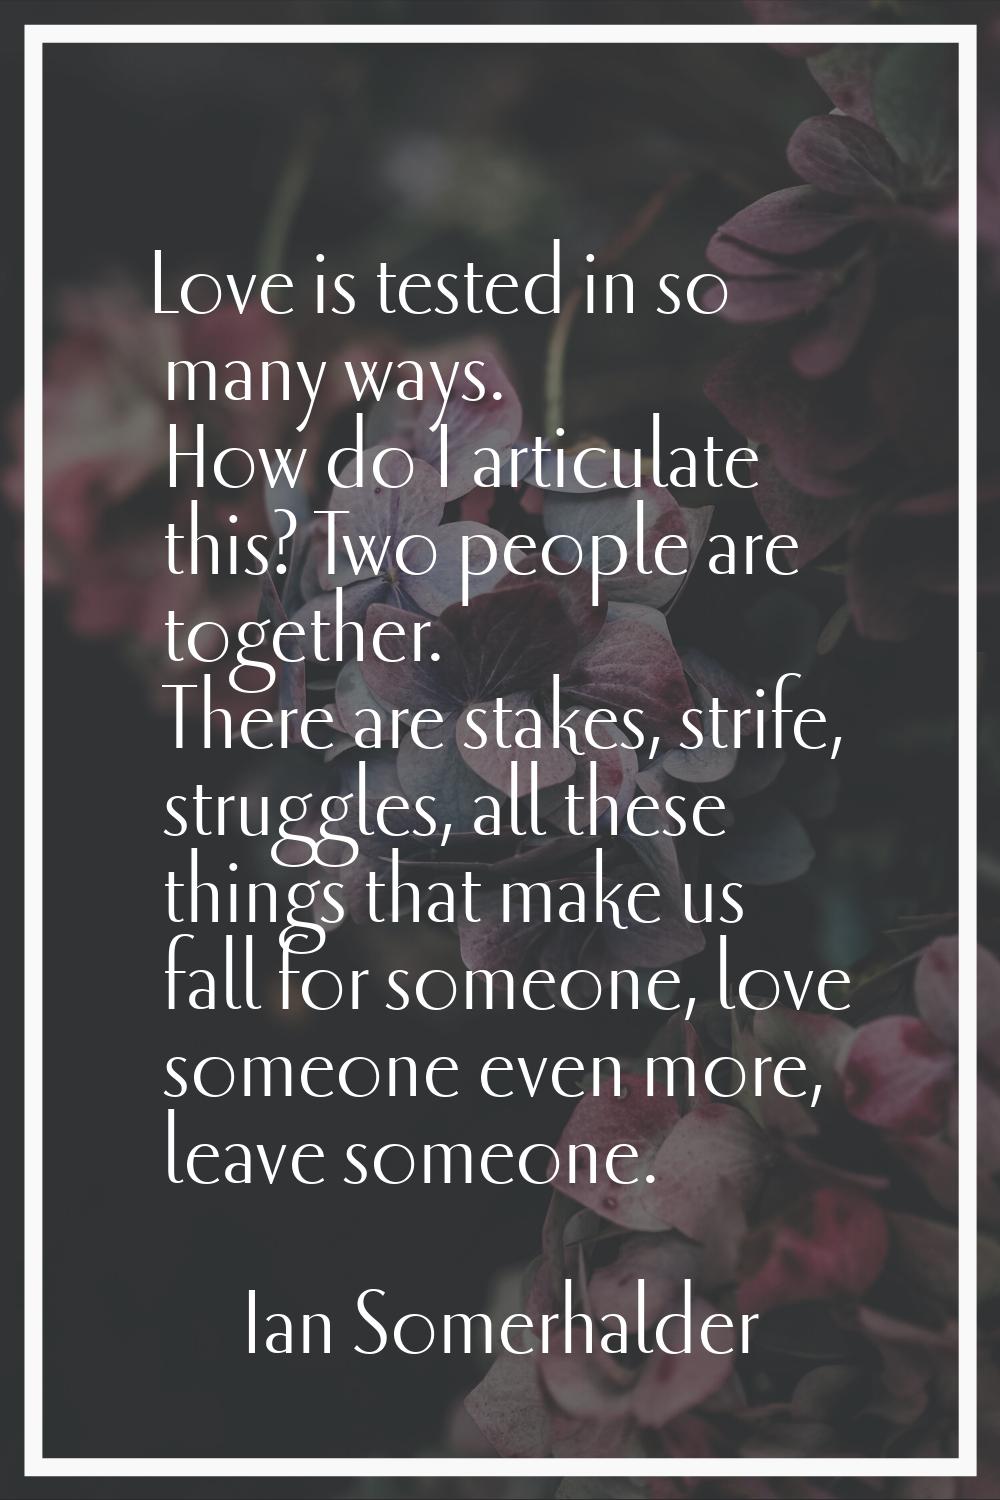 Love is tested in so many ways. How do I articulate this? Two people are together. There are stakes